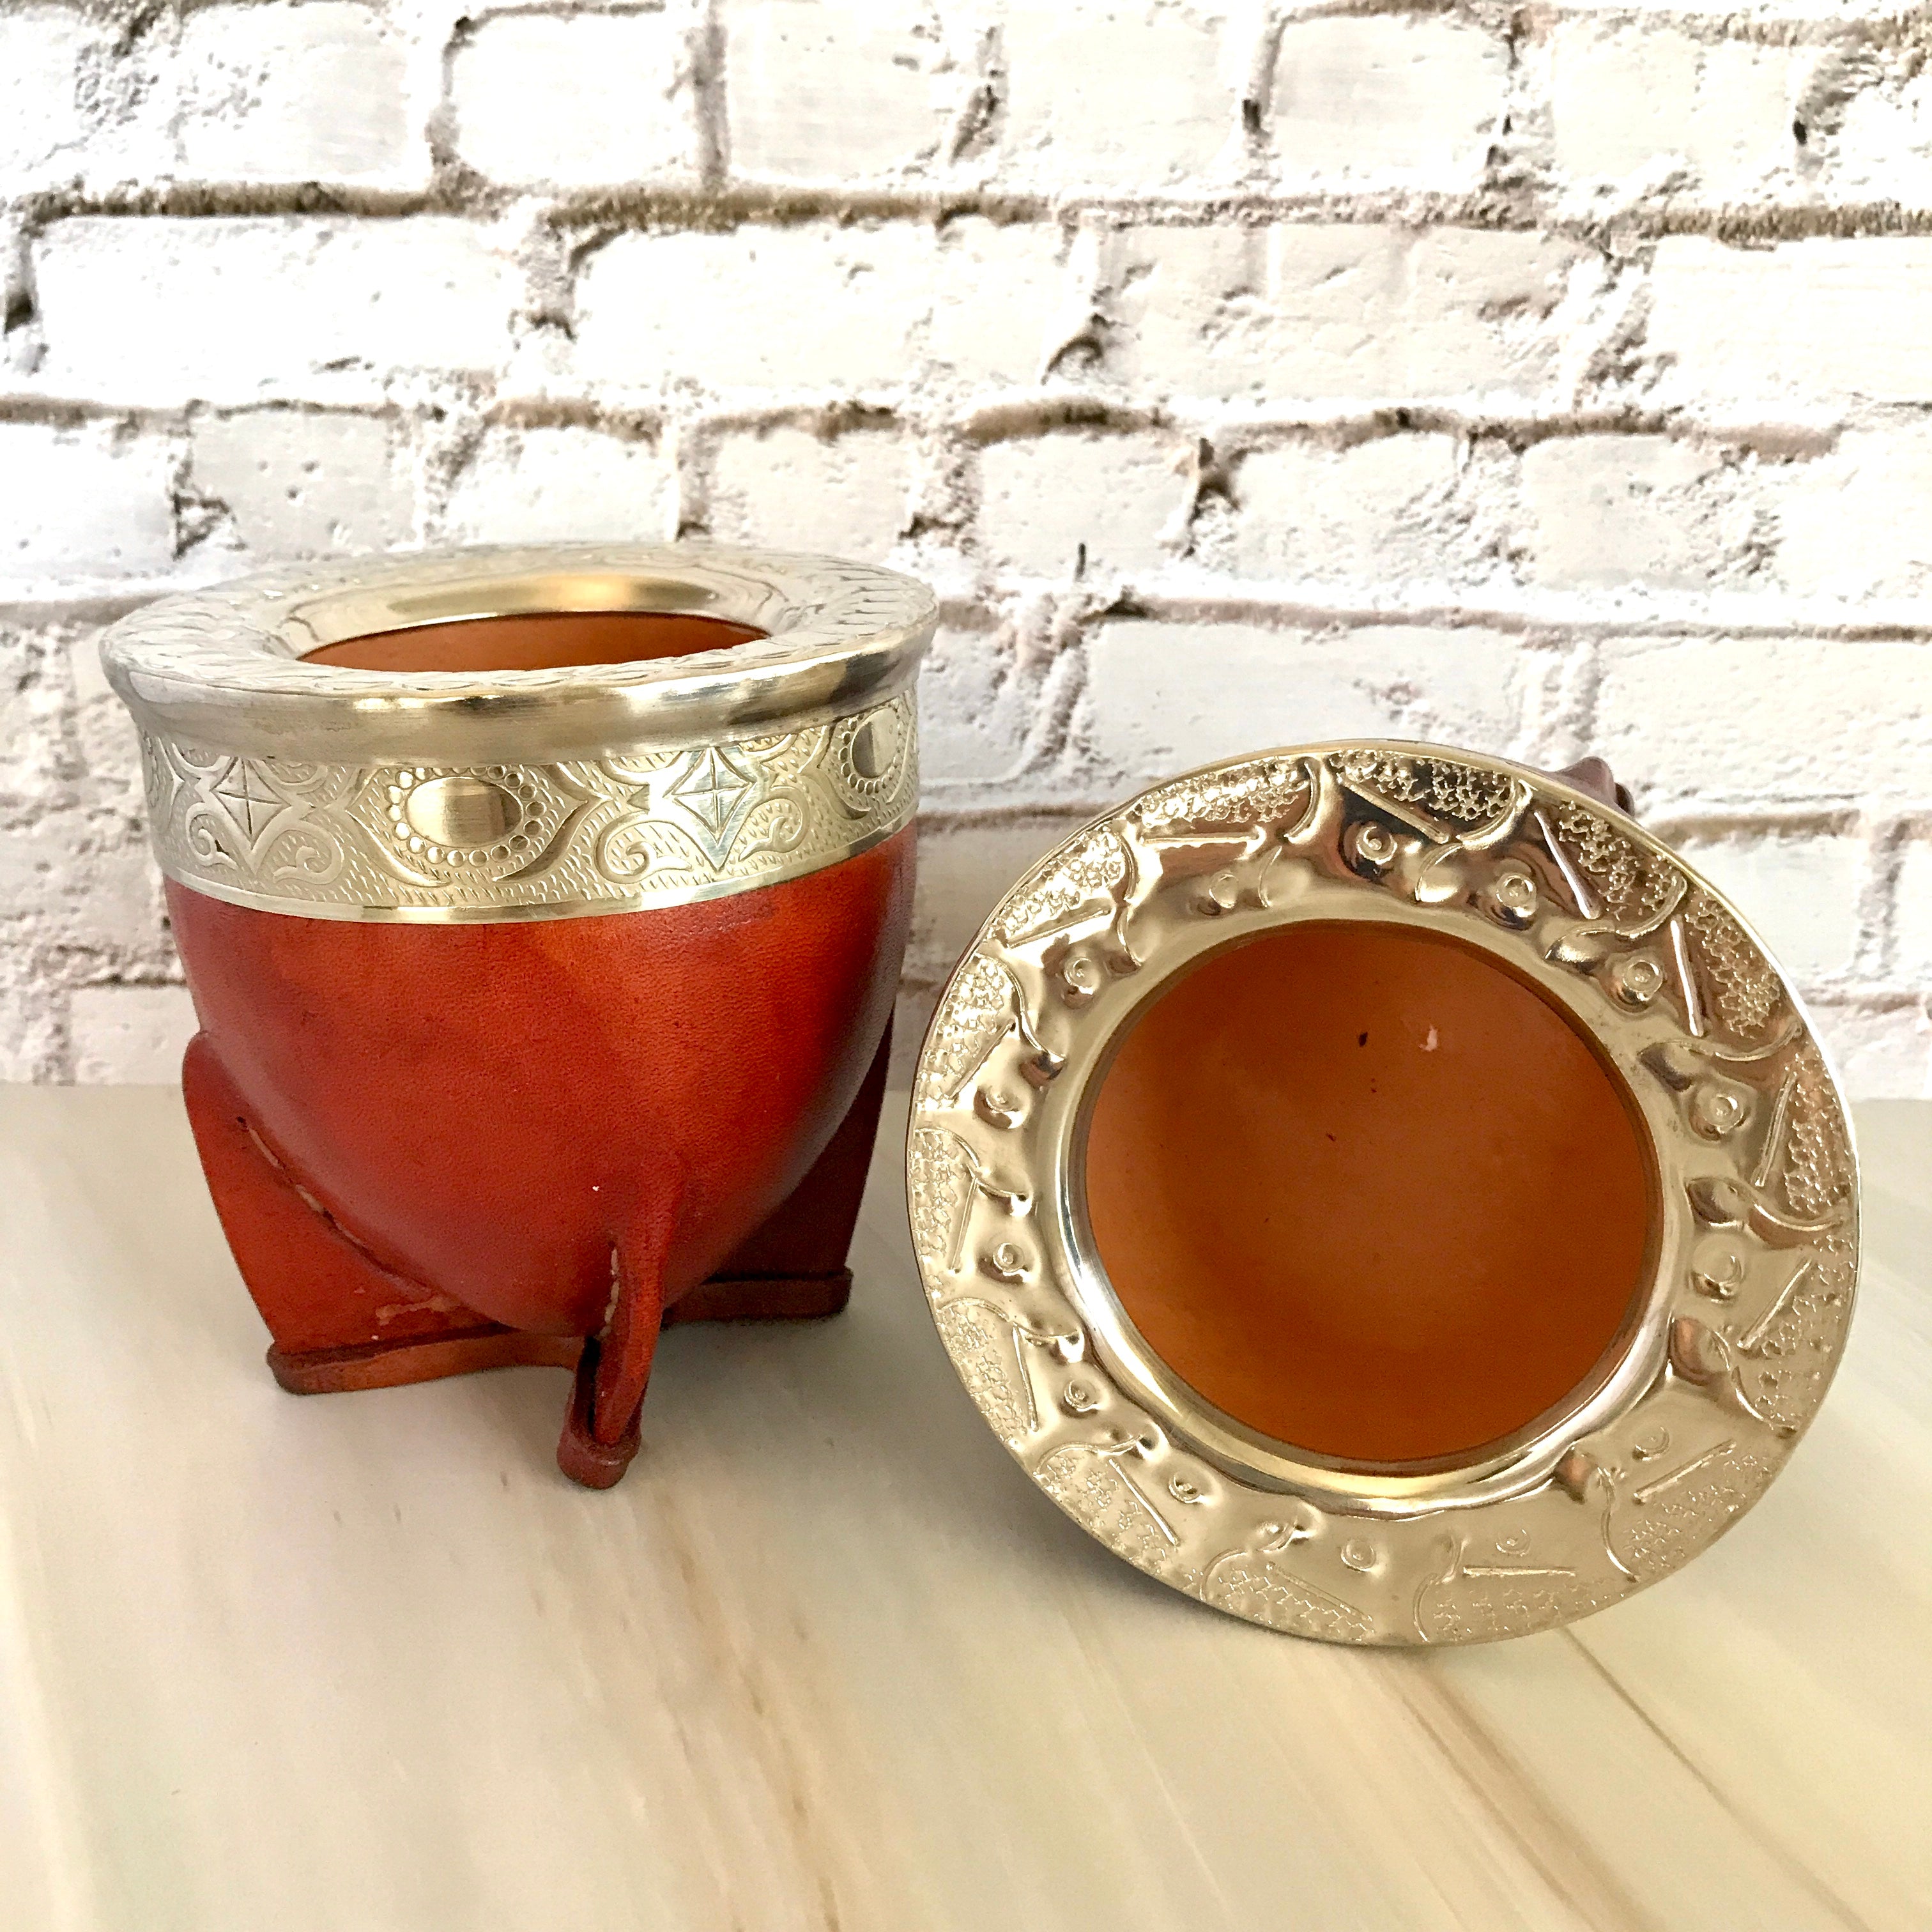 PREMIUM COLLECTION - The Brown Imperial Calabash Mate Gourd Set